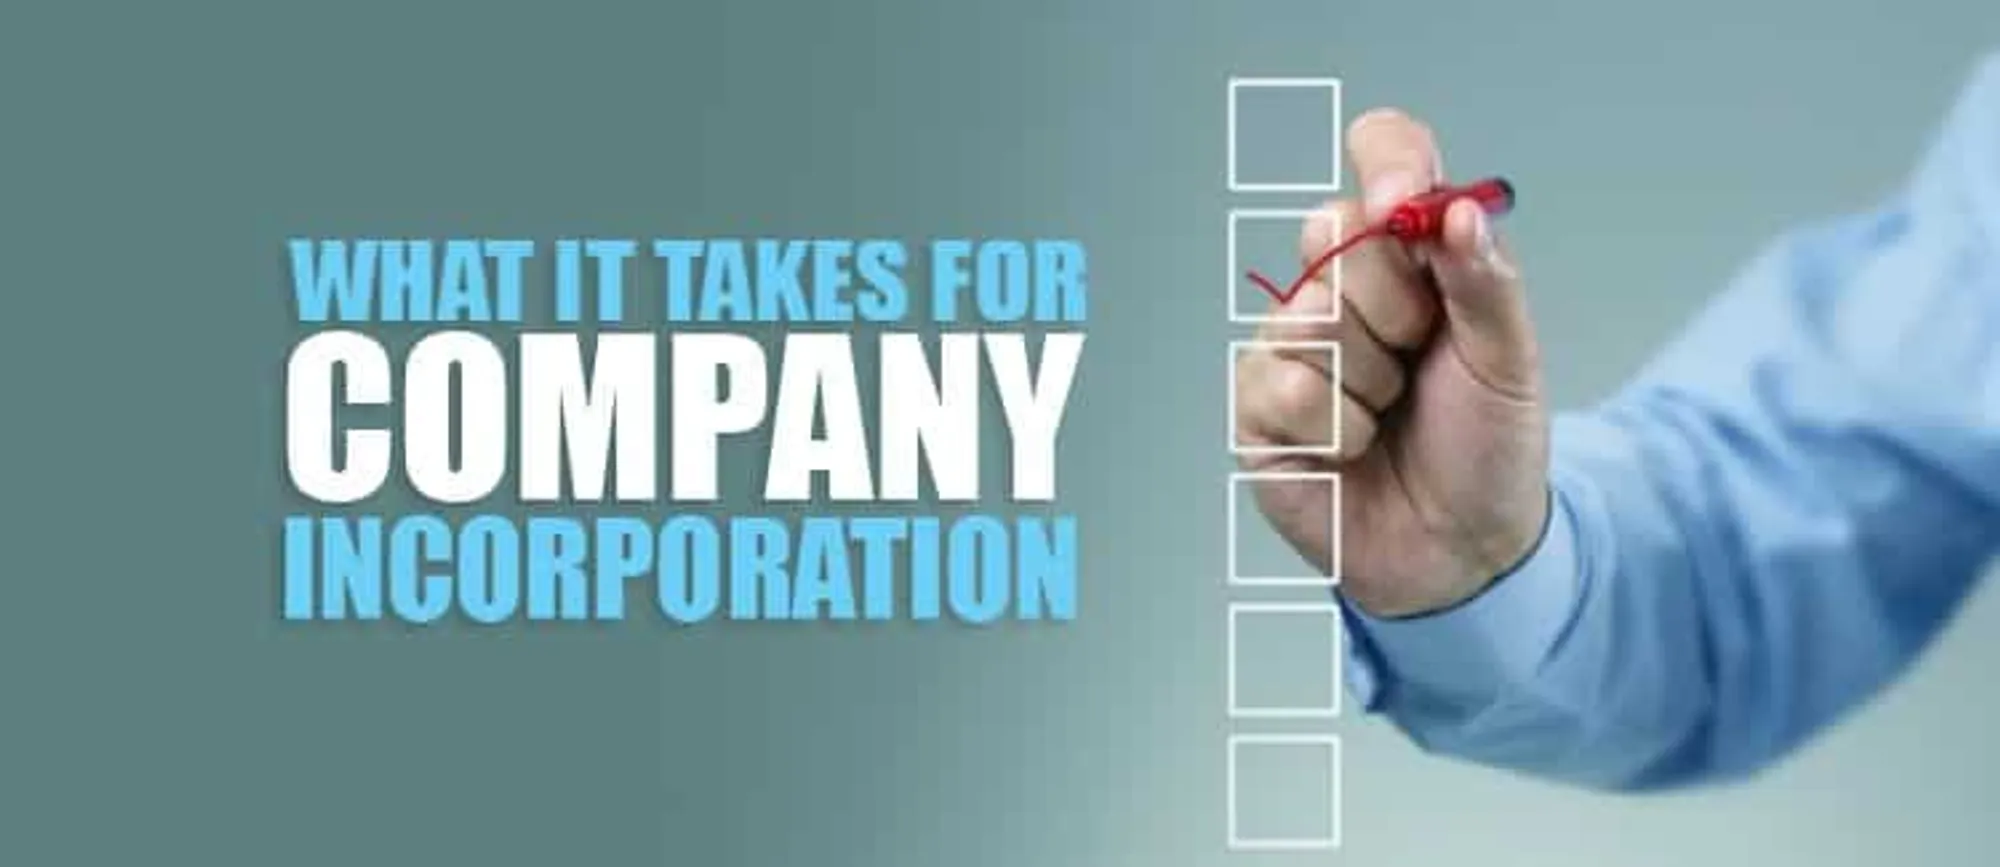 What it takes for Company Incorporation